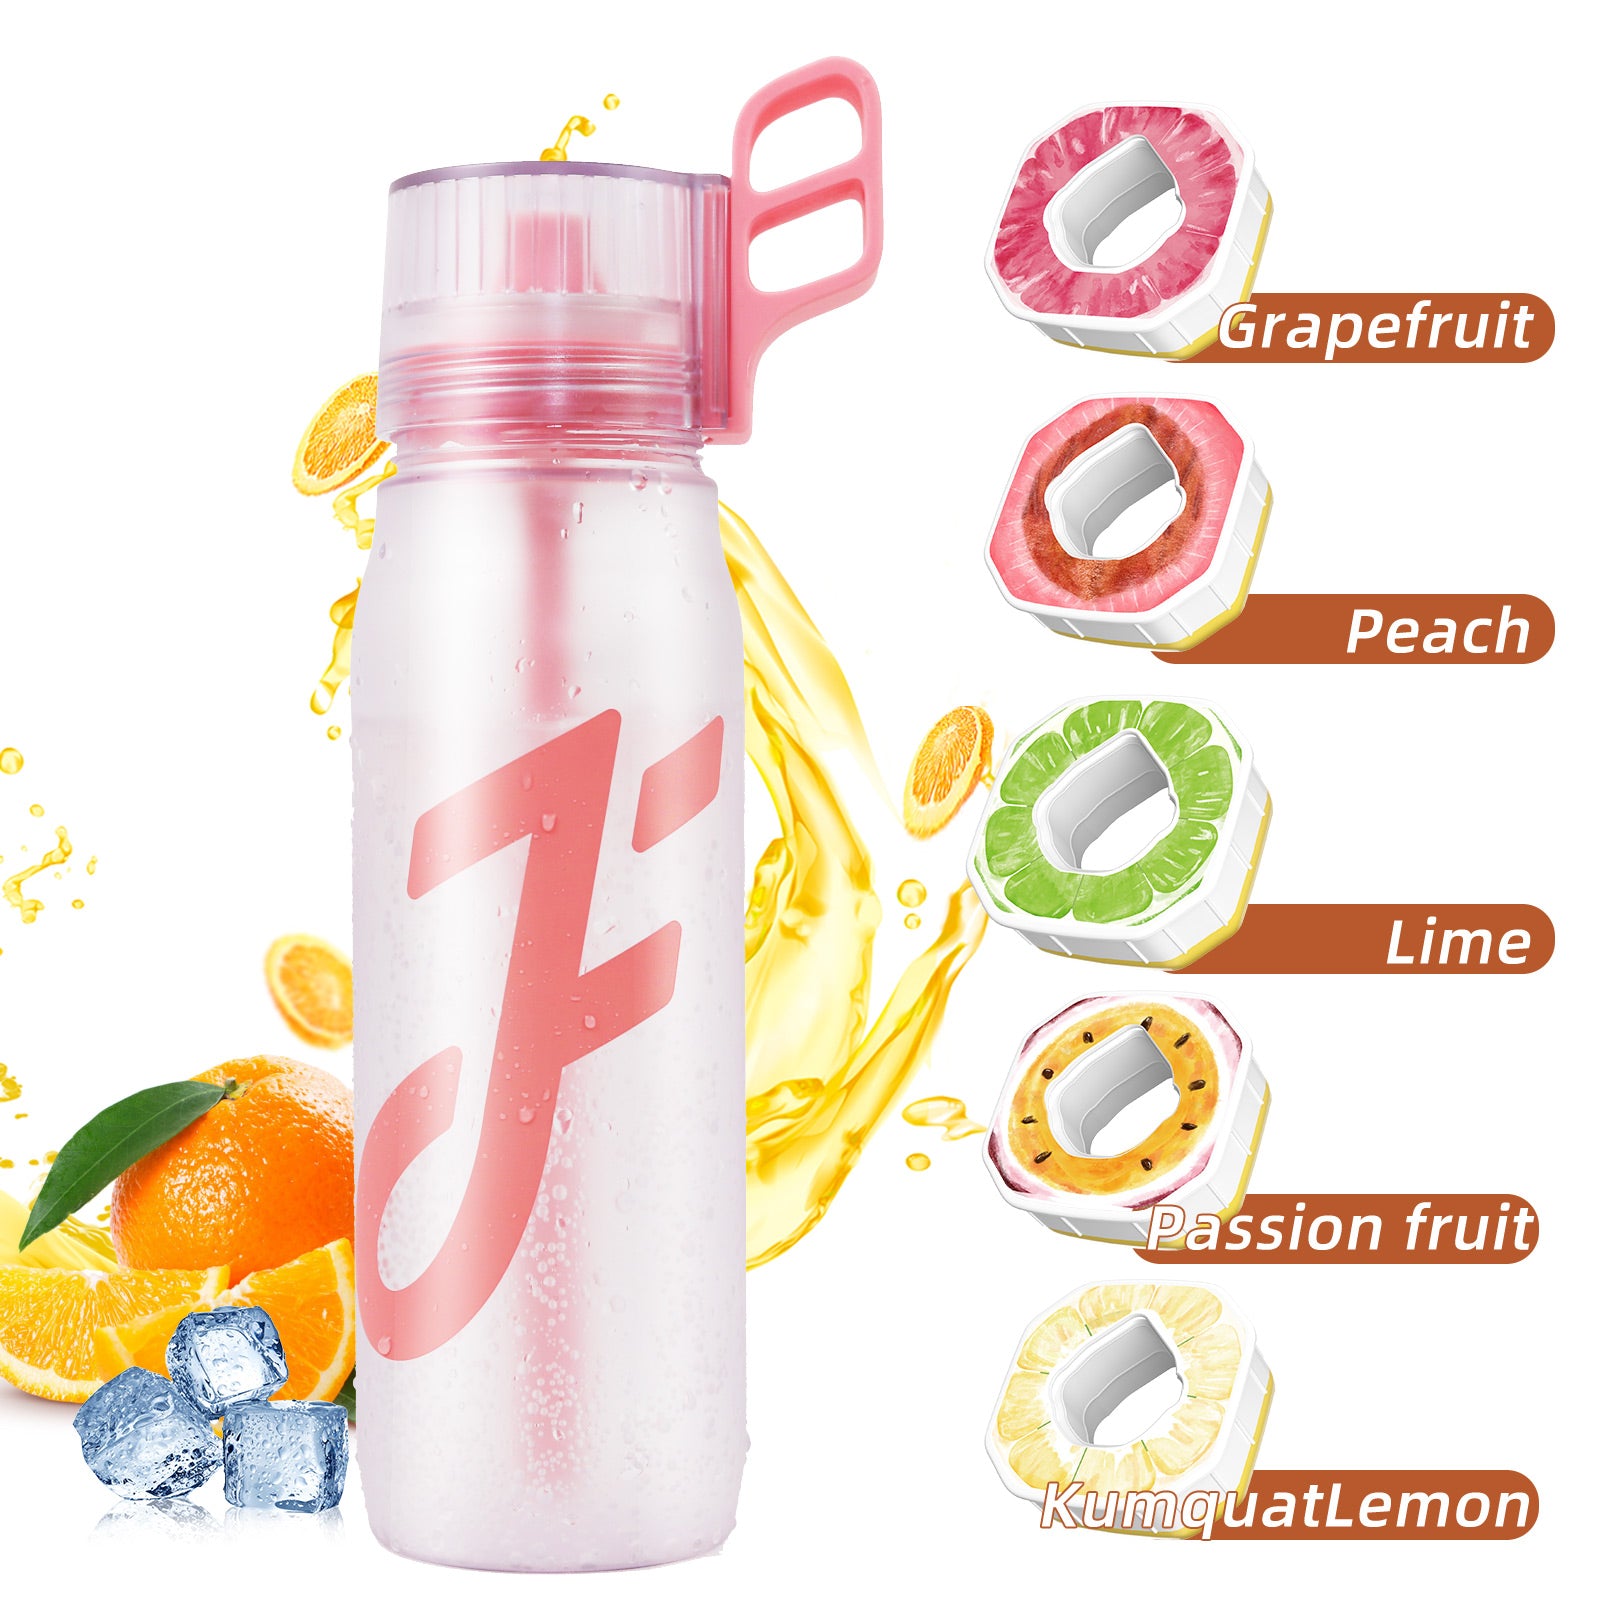 22oz Air Water Bottle with Flavor Pods Scent Beverage Water Cup, Stra